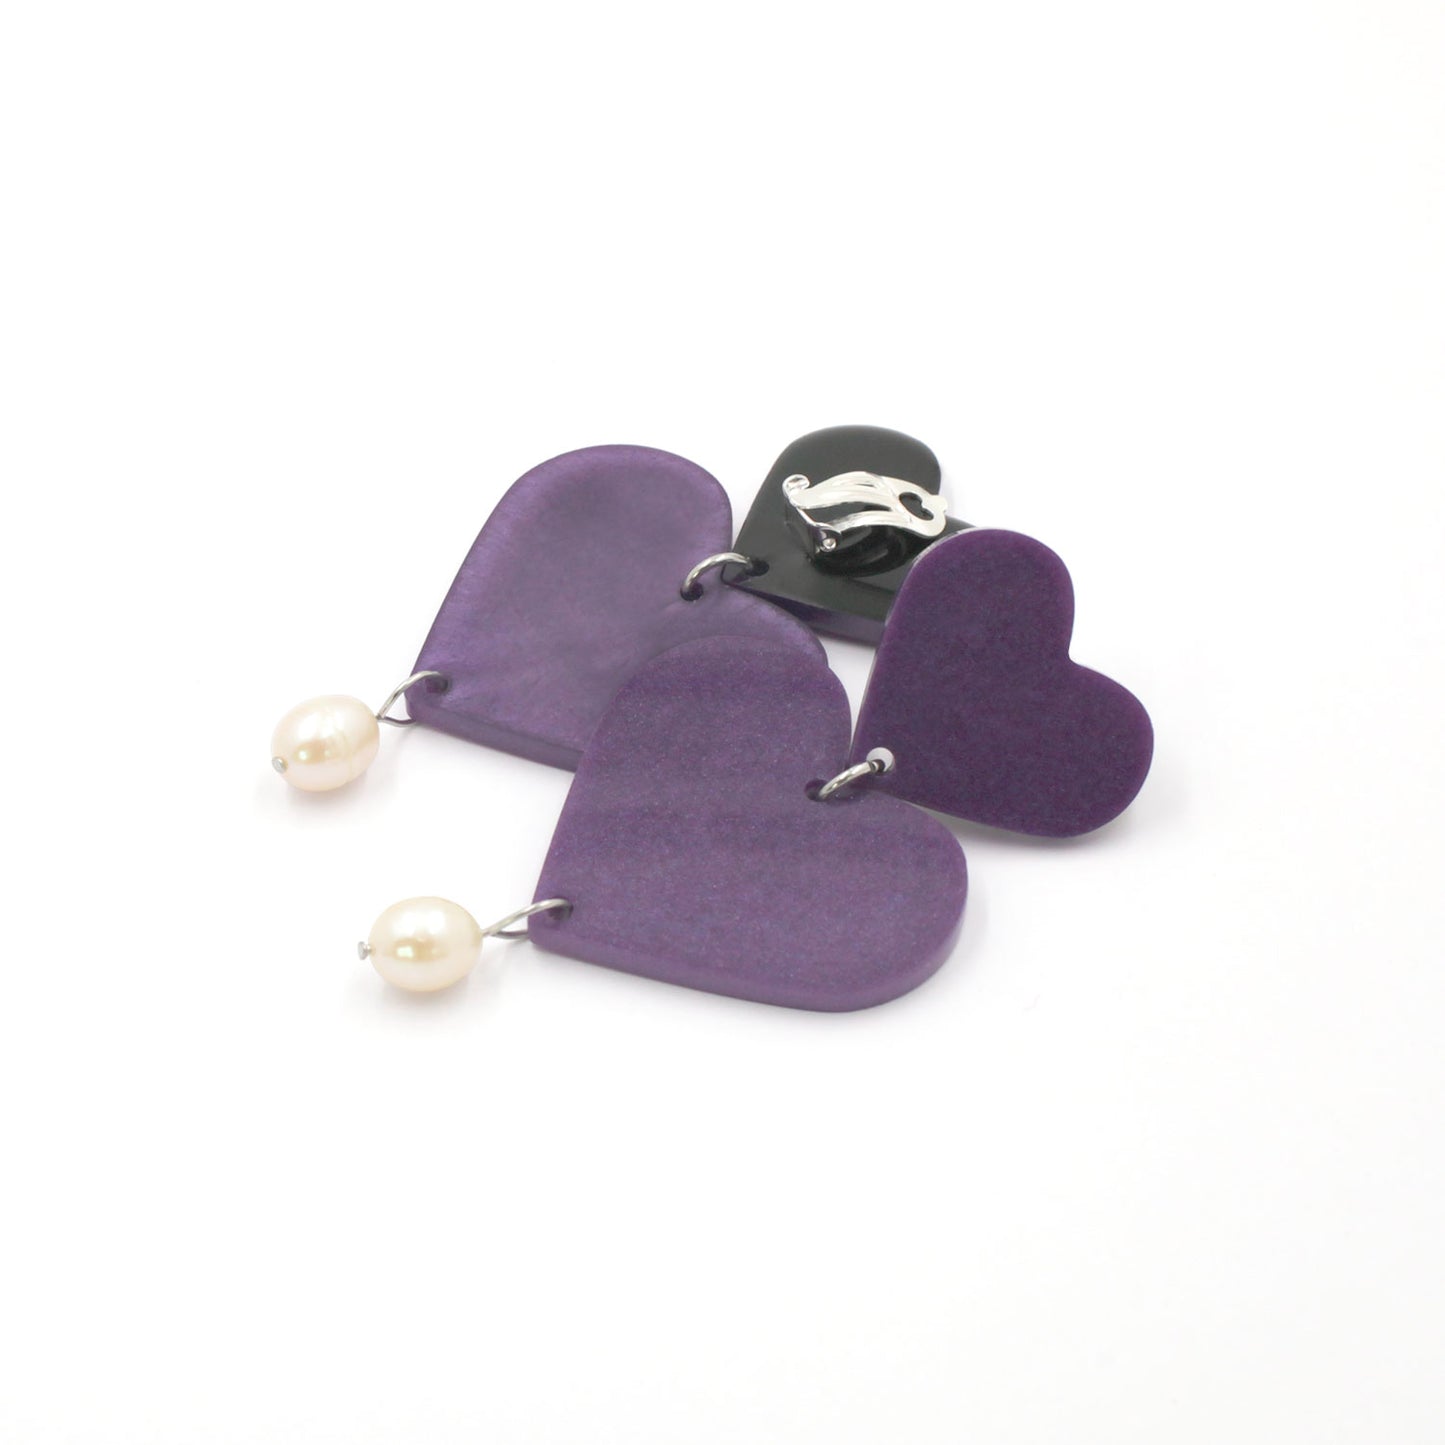 This is a picture of purple hearts earrings with freshwater pearls on a white background.  one is on the back, the clip on are silver with silicone pad protection. 